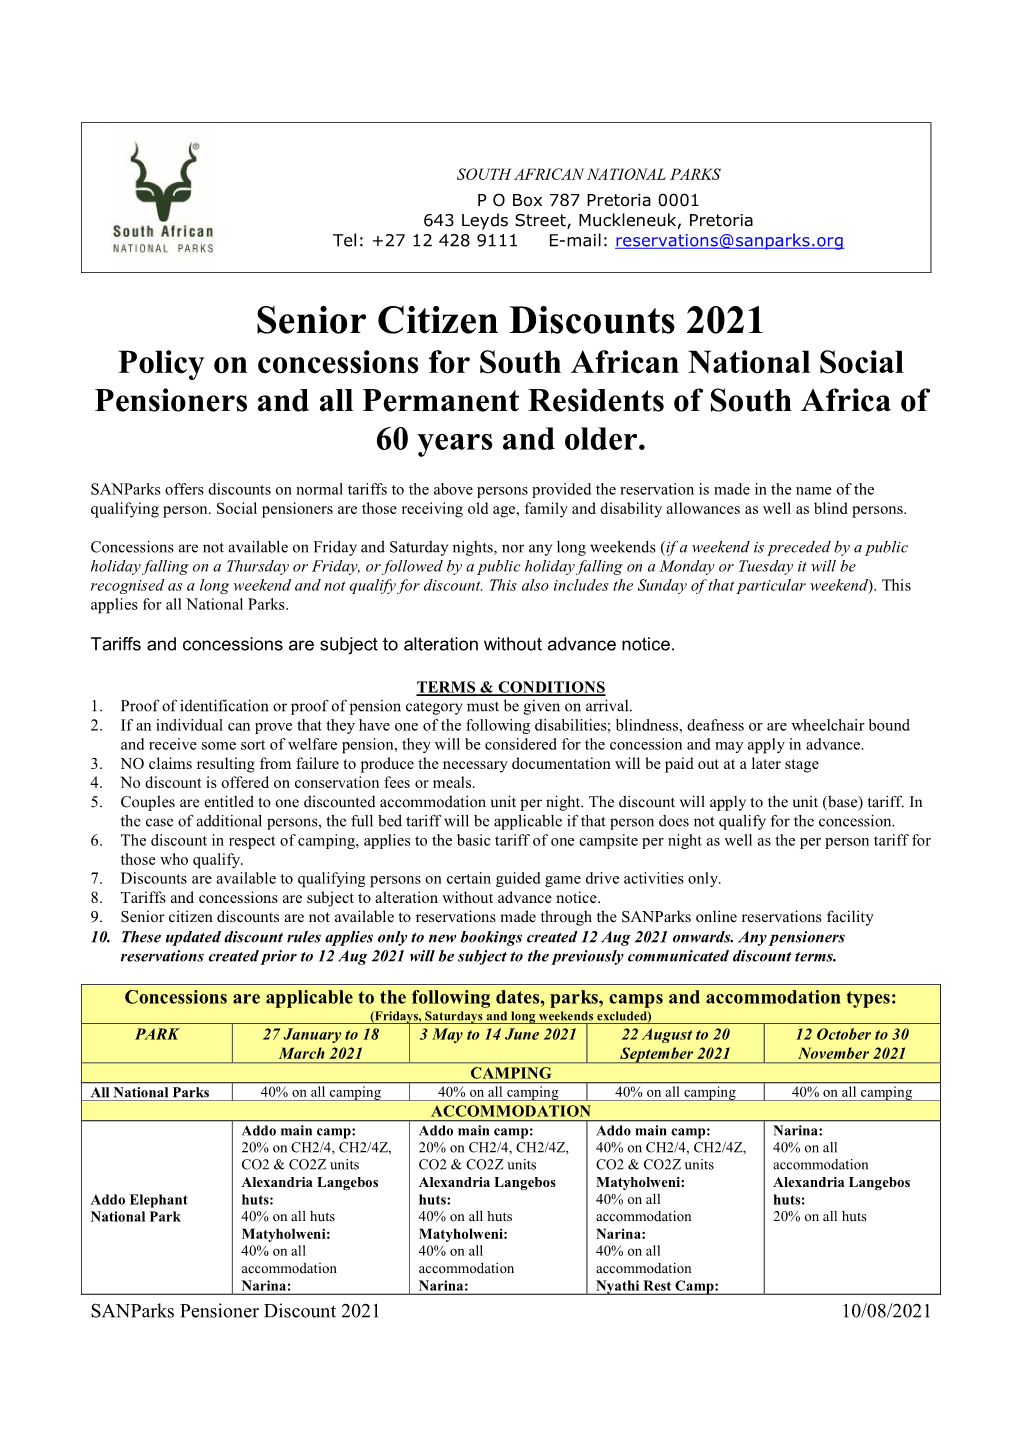 Senior Citizen Discounts 2021 Policy on Concessions for South African National Social Pensioners and All Permanent Residents of South Africa of 60 Years and Older